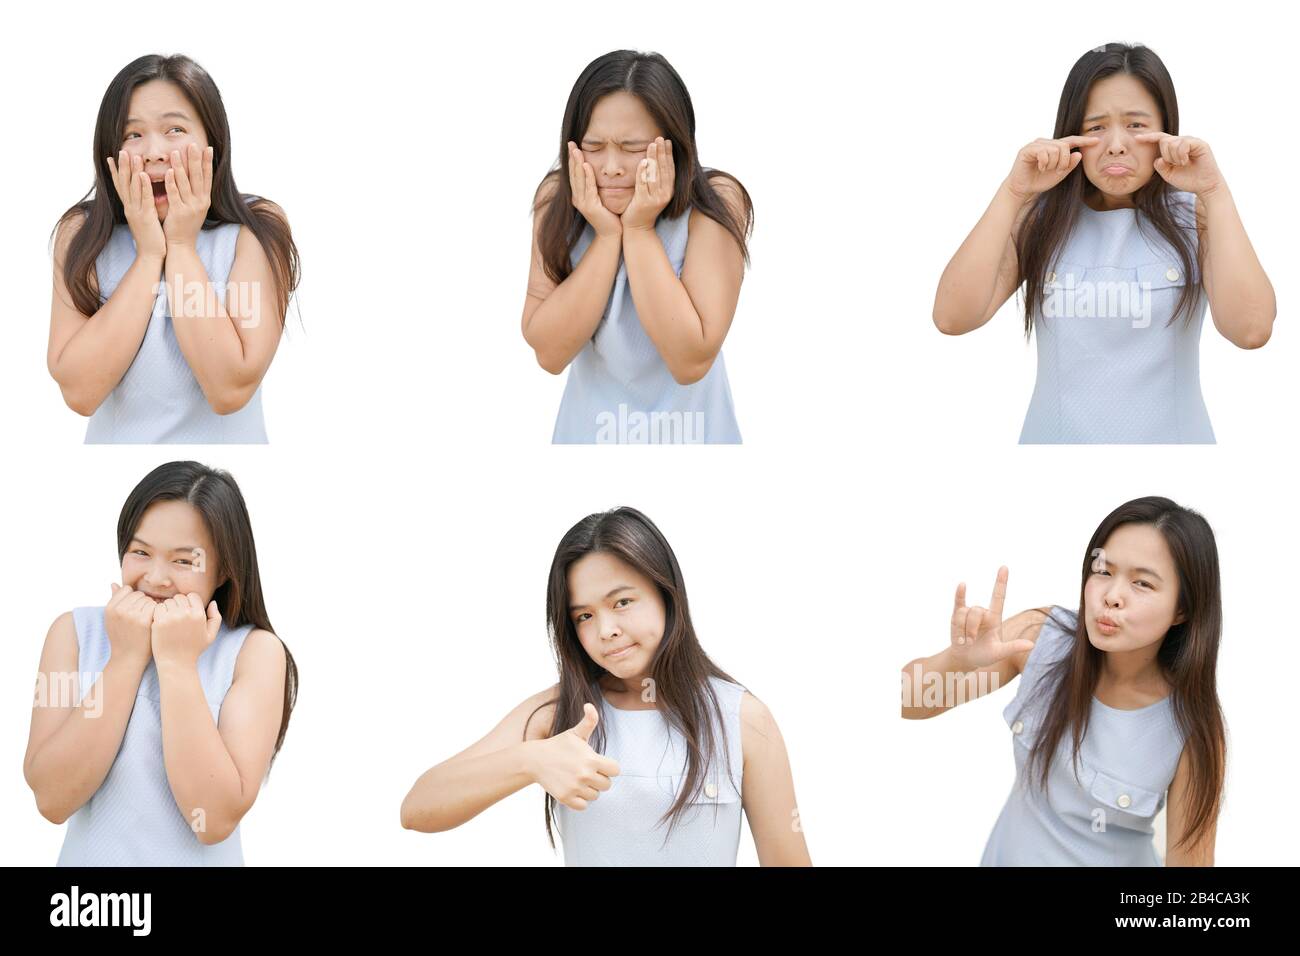 White-background isolated woman emotions set images with different facial expressions and body language in both positive and negative emotions by chee Stock Photo